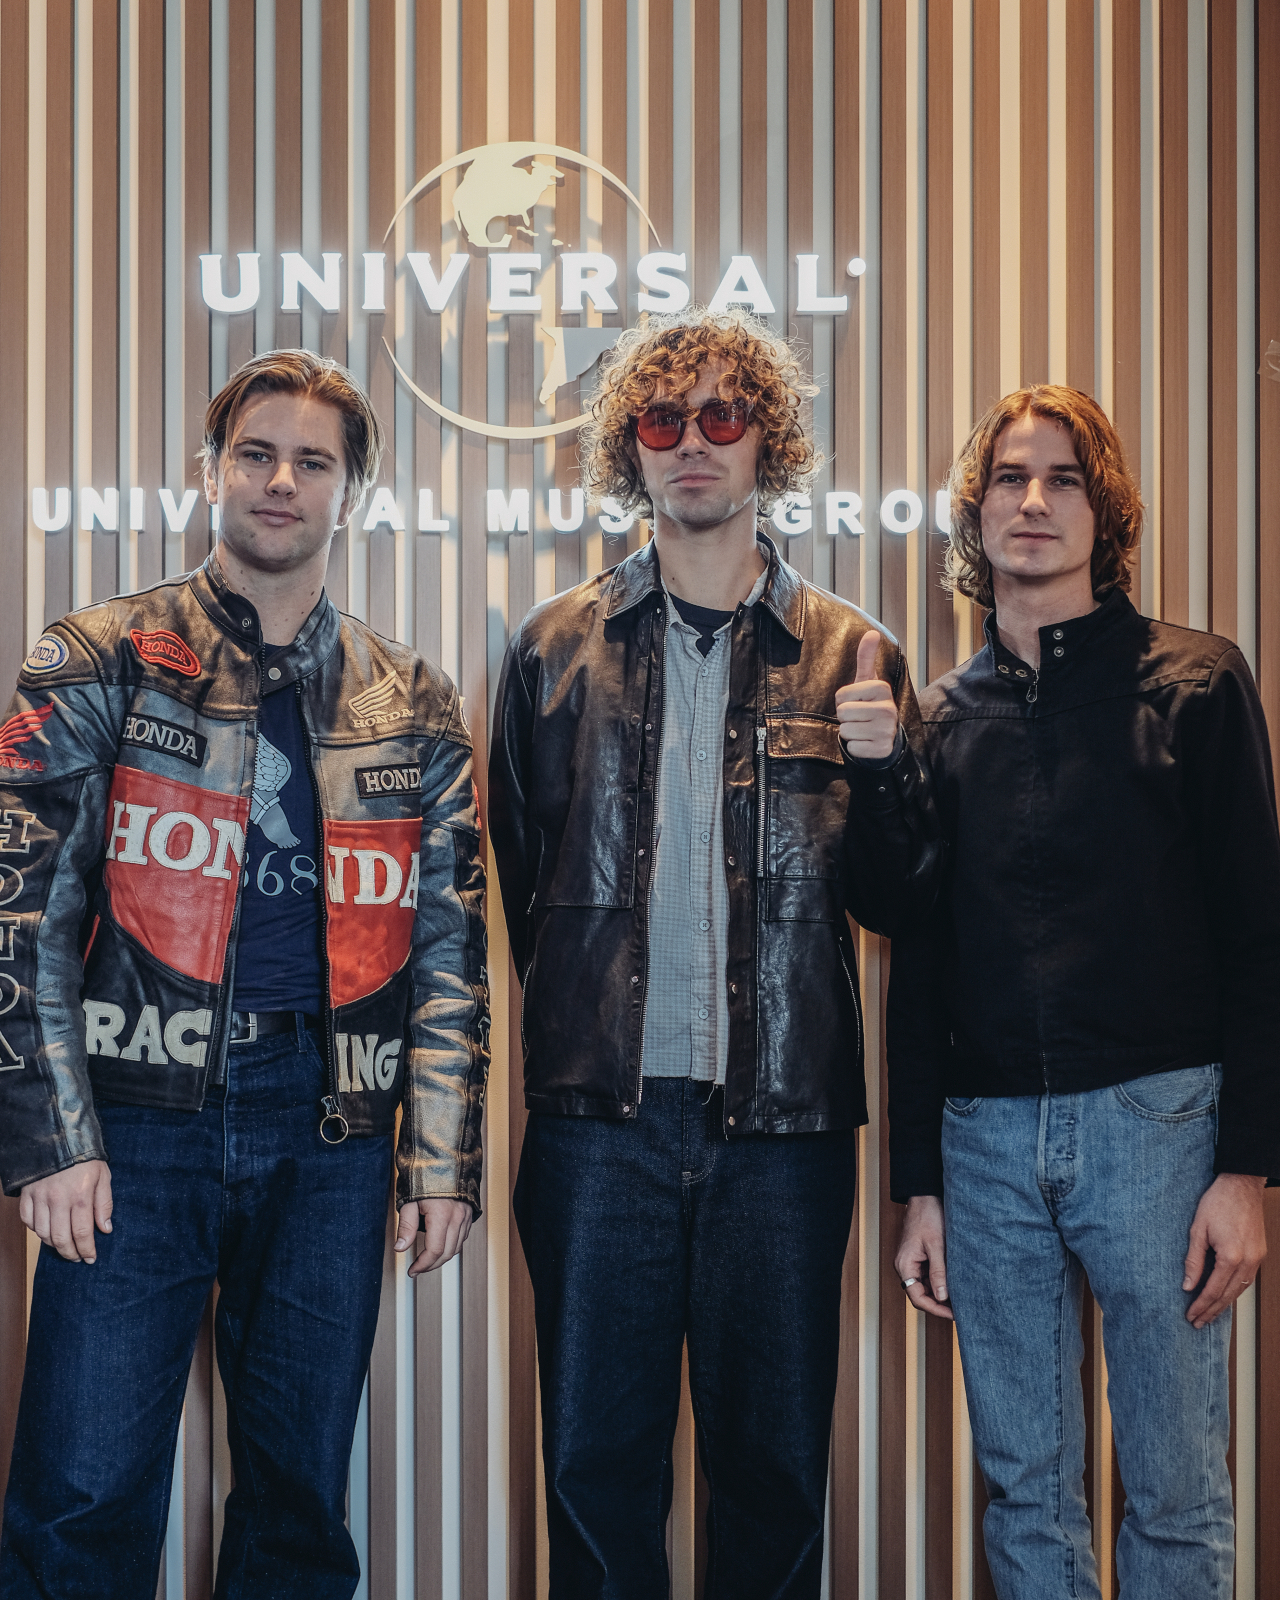 American alt-pop band almost monday poses for photos during a press conference held at Universal Music Korea’s headquarters in Gangnam-gu, southern Seoul, Tuesday. (Universal Music Korea)